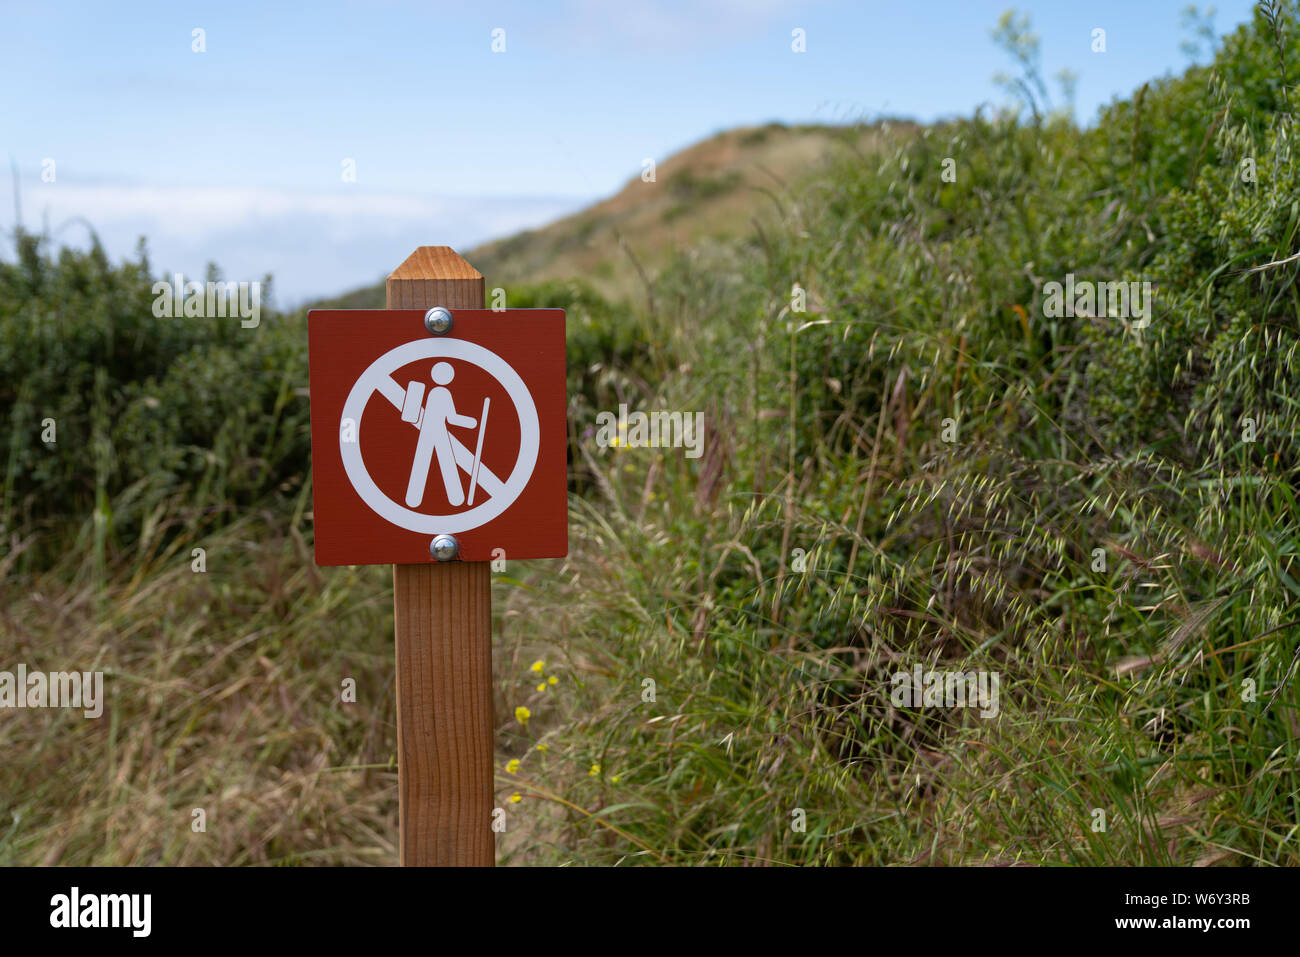 no-hiking-cross-out-warning-sign-in-a-dangerous-area-on-trail-stock